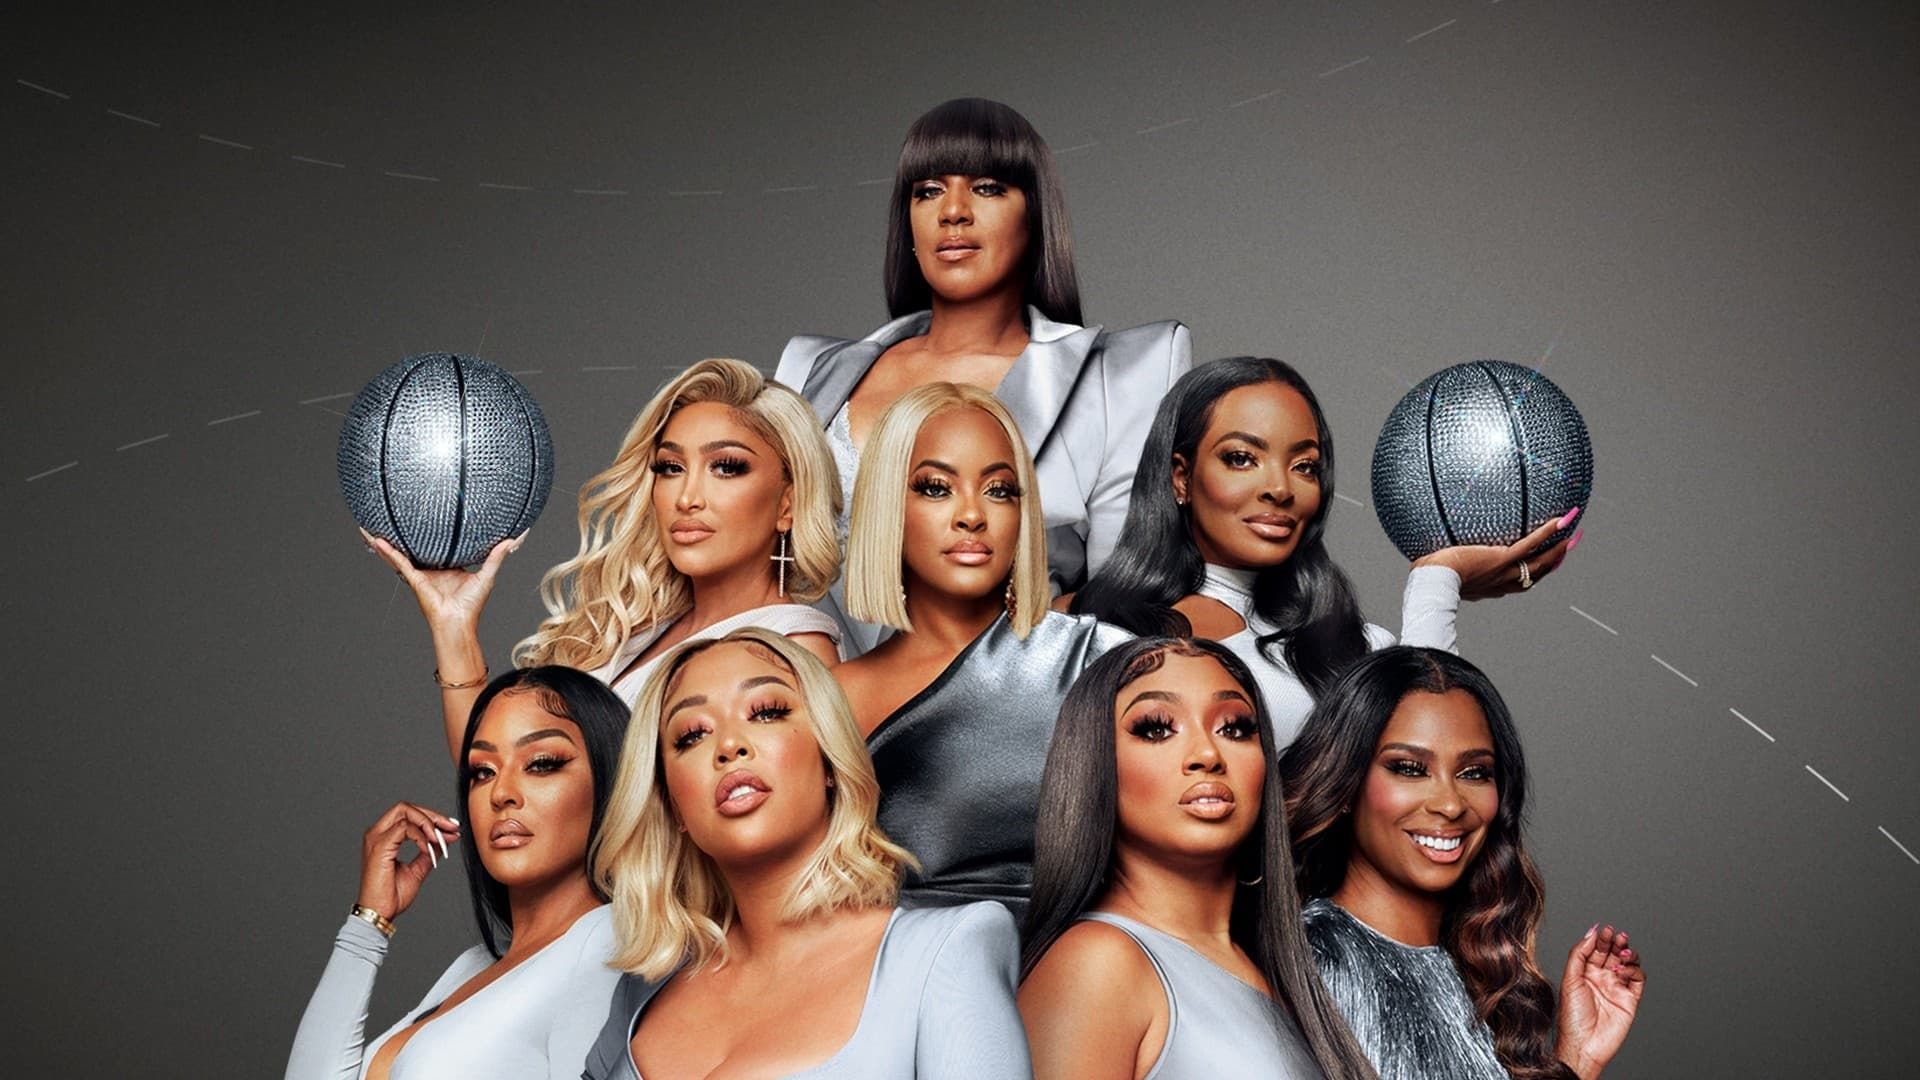 Basketball Wives background